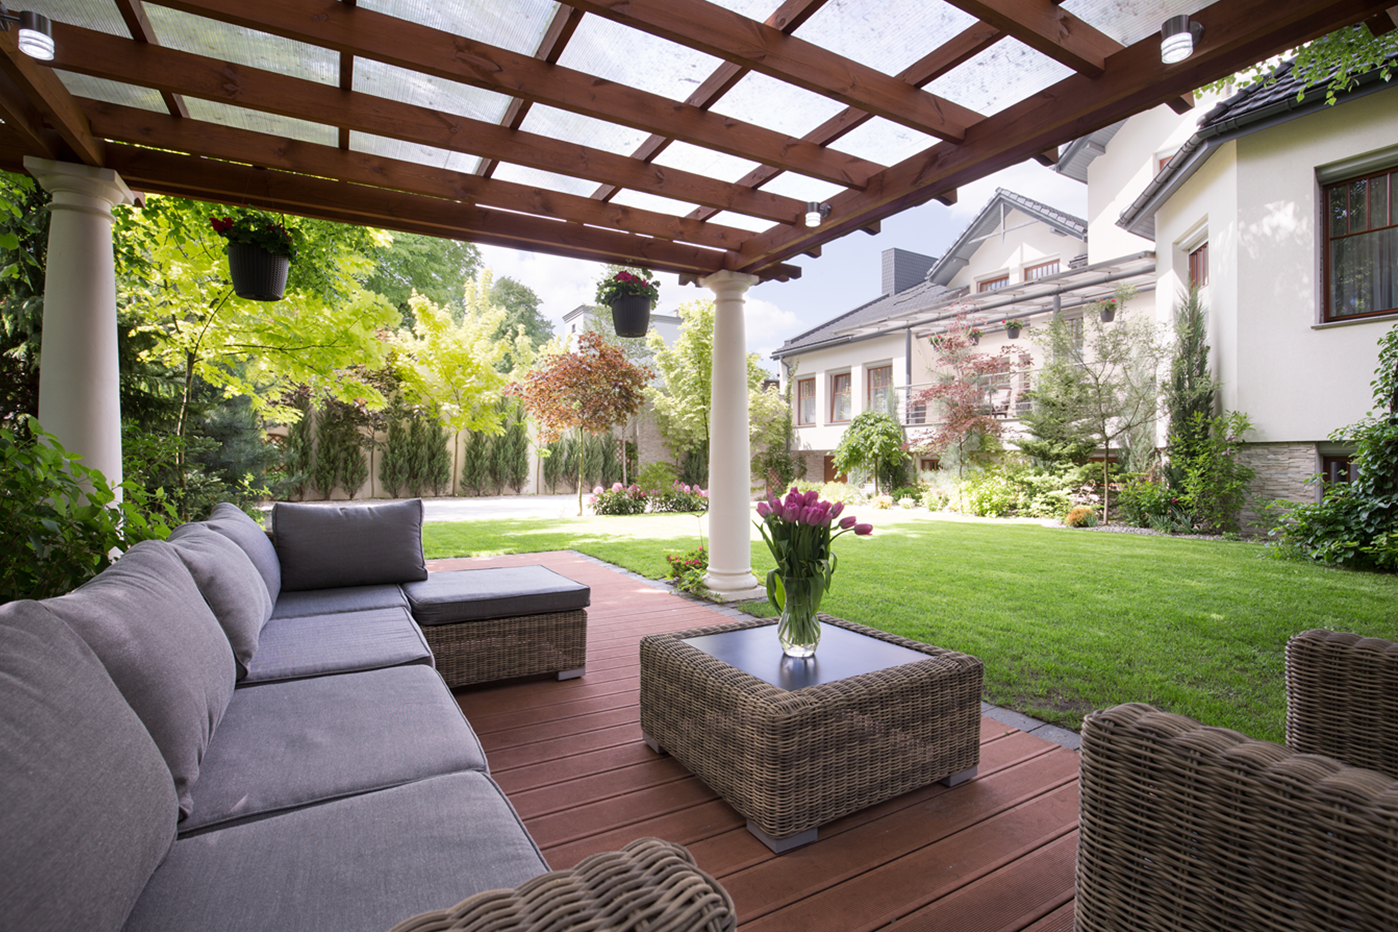 How to Choose the Best Patio Cover Material